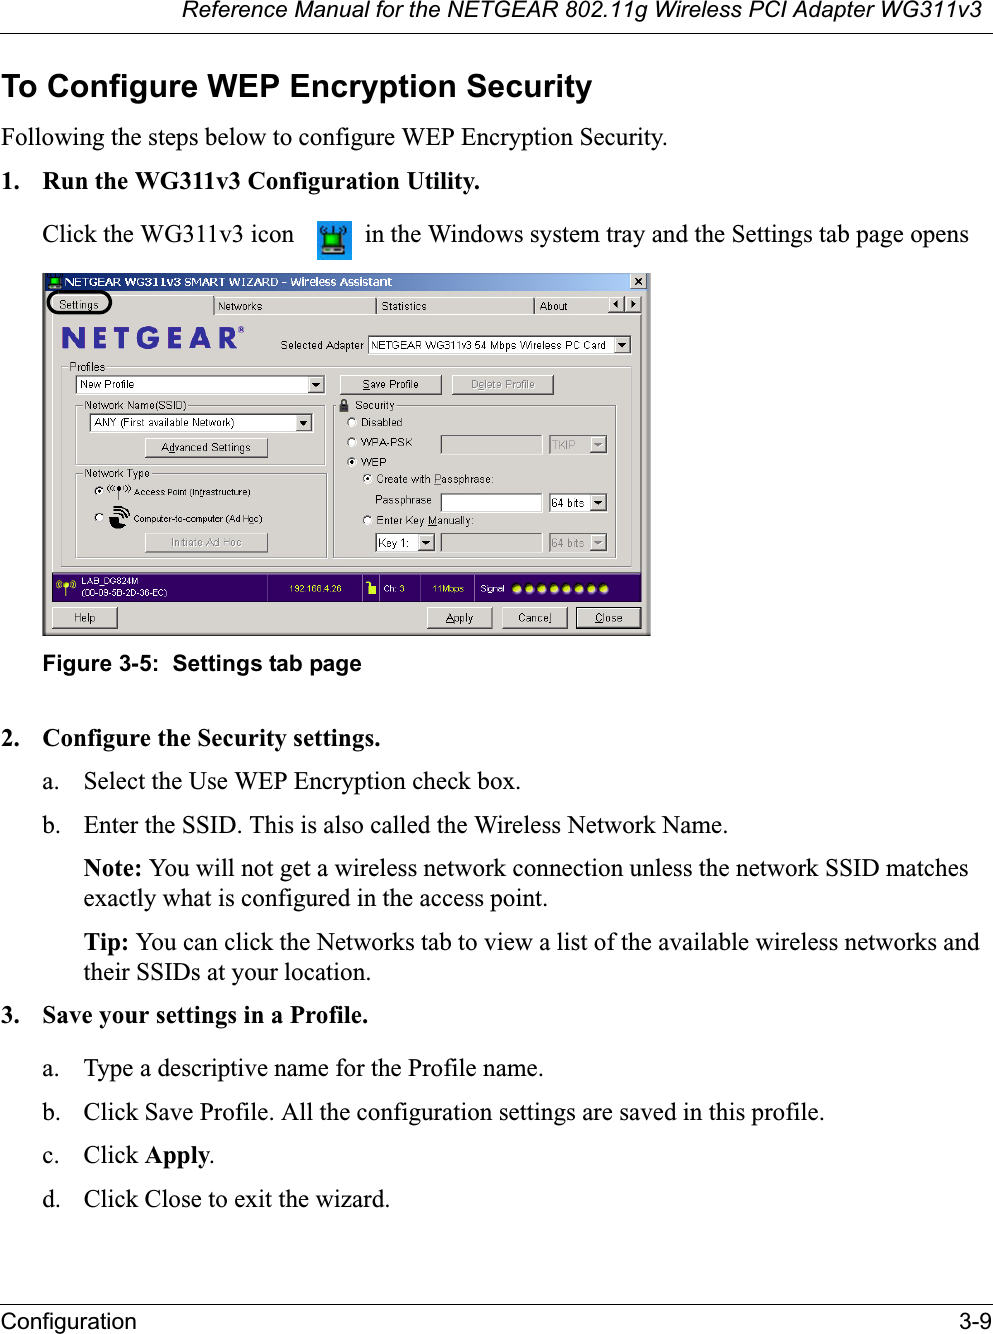 Reference Manual for the NETGEAR 802.11g Wireless PCI Adapter WG311v3Configuration 3-9To Configure WEP Encryption SecurityFollowing the steps below to configure WEP Encryption Security.1. Run the WG311v3 Configuration Utility.Click the WG311v3 icon   in the Windows system tray and the Settings tab page opensFigure 3-5:  Settings tab page2. Configure the Security settings. a. Select the Use WEP Encryption check box.b. Enter the SSID. This is also called the Wireless Network Name.Note: You will not get a wireless network connection unless the network SSID matches exactly what is configured in the access point. Tip: You can click the Networks tab to view a list of the available wireless networks and their SSIDs at your location. 3. Save your settings in a Profile. a. Type a descriptive name for the Profile name. b. Click Save Profile. All the configuration settings are saved in this profile. c. Click Apply.d. Click Close to exit the wizard.